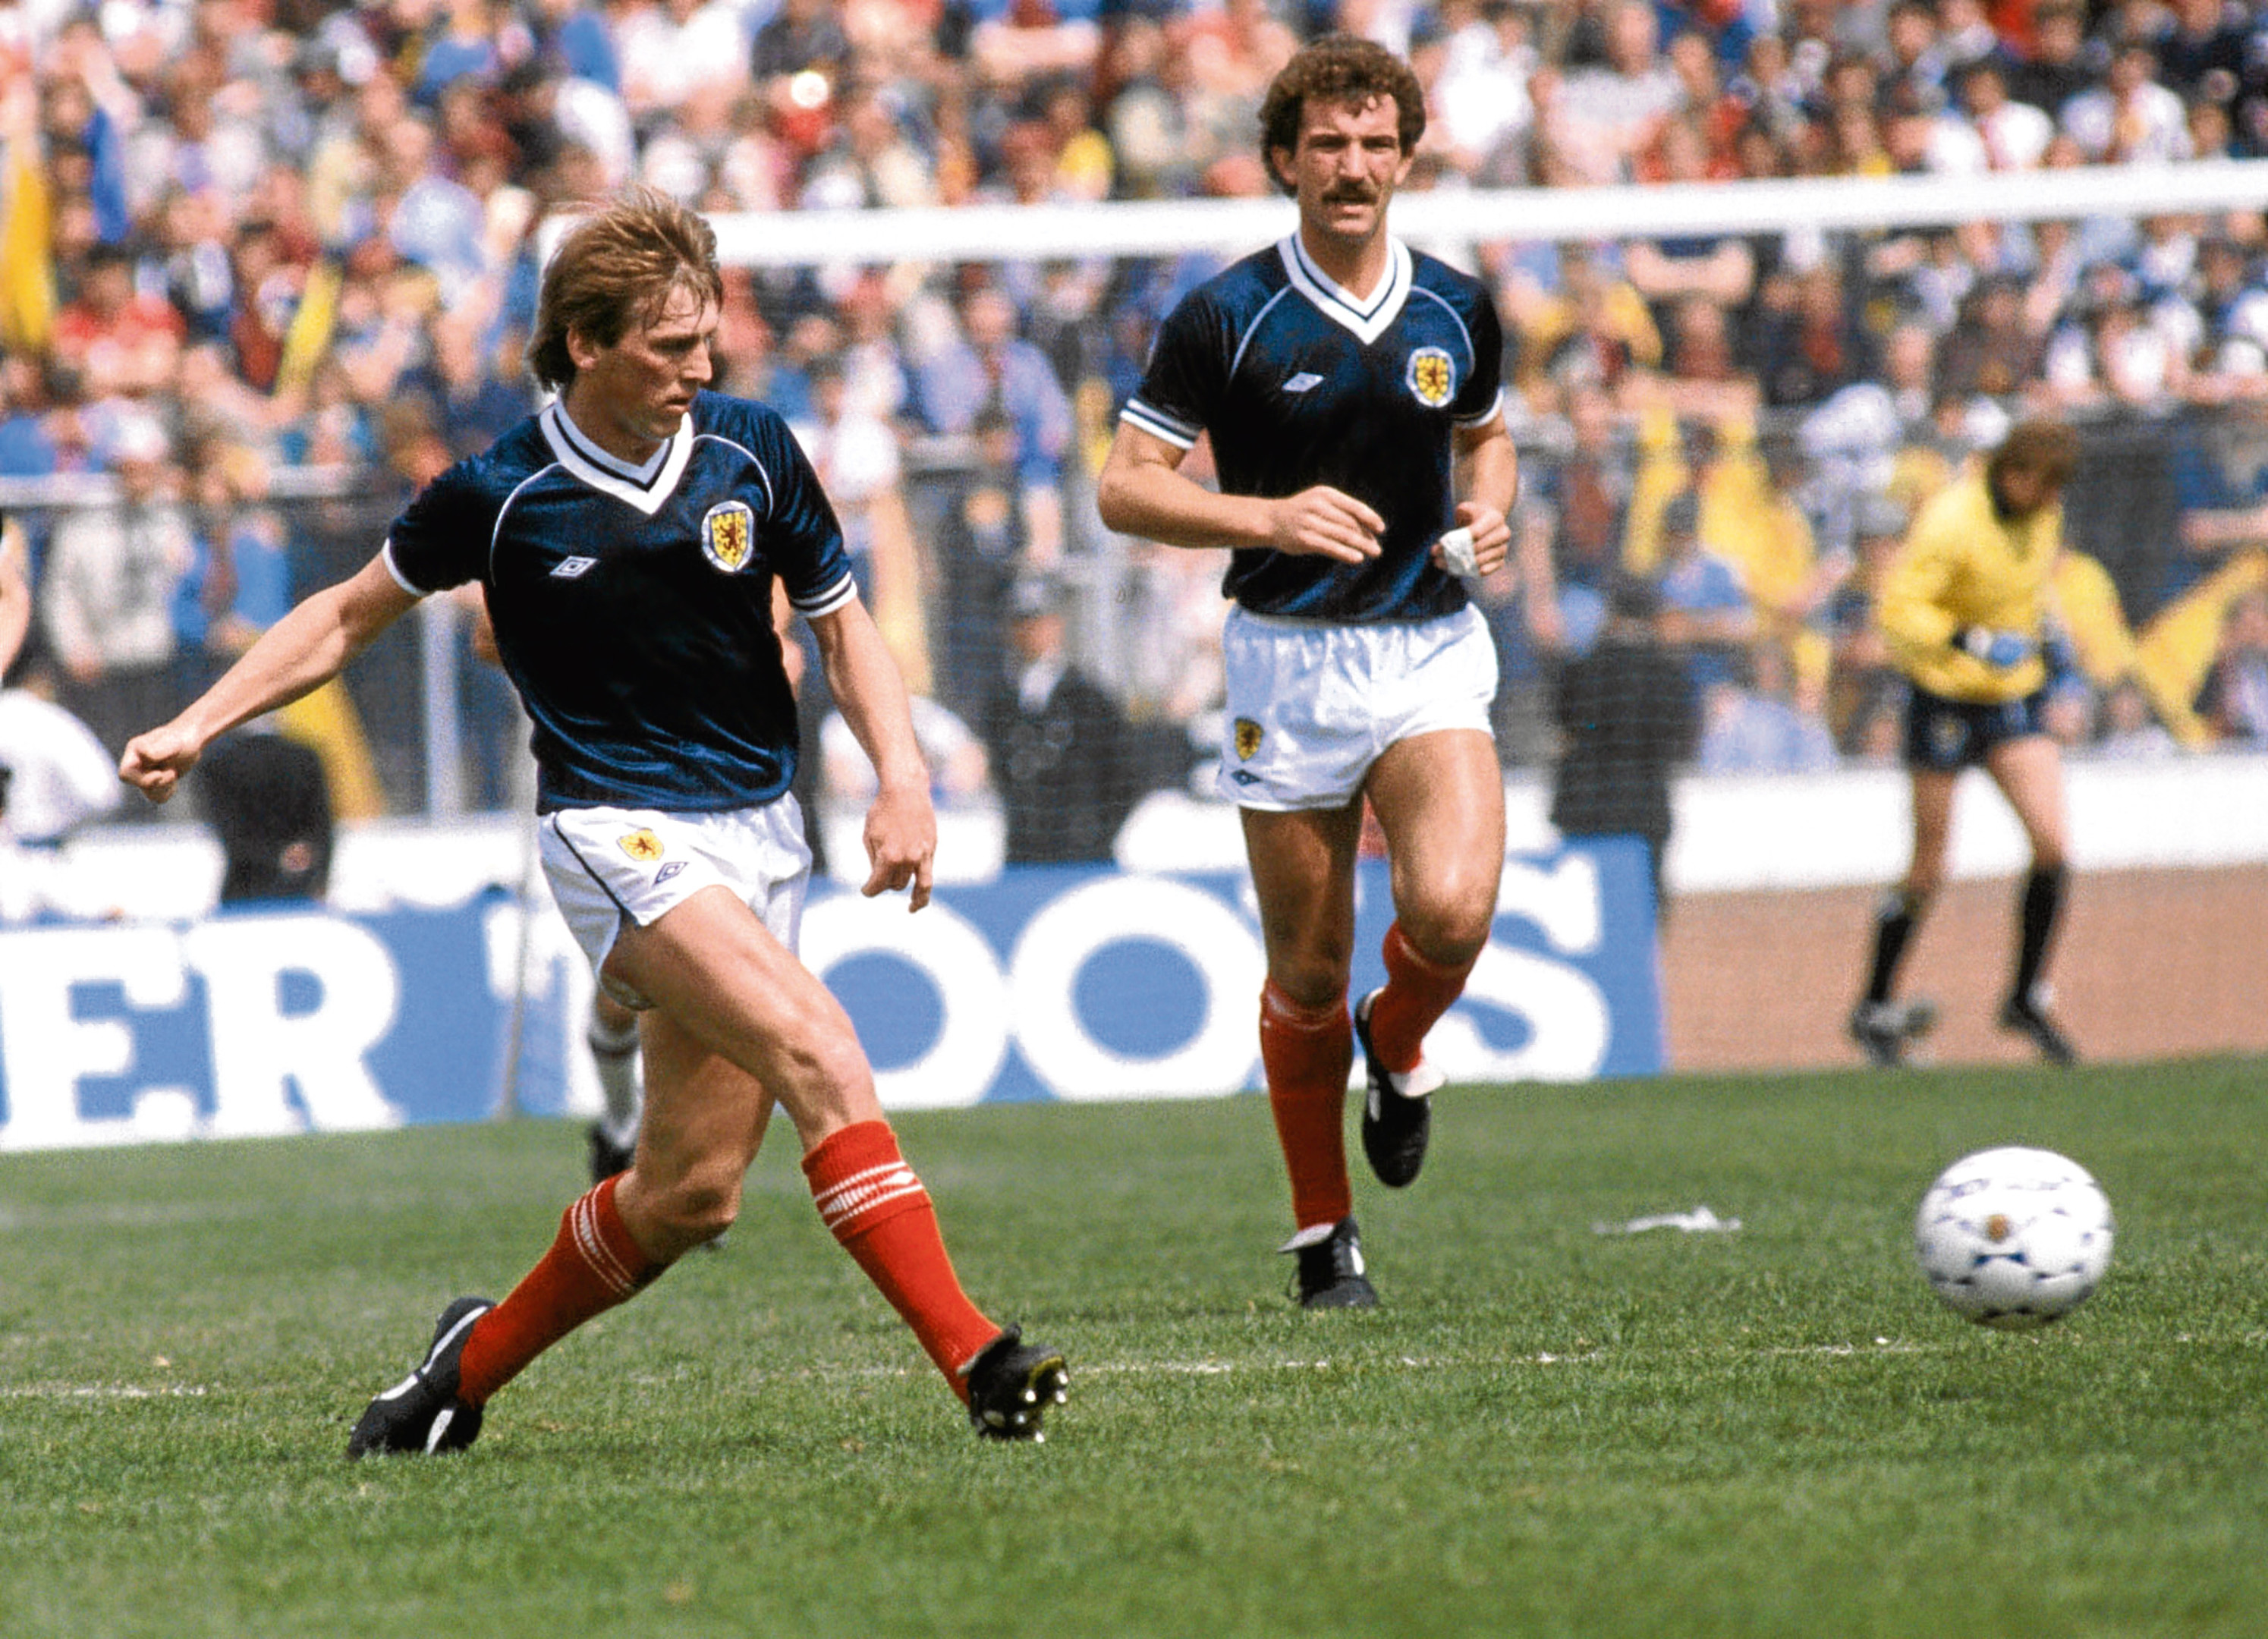 Scotland's Kenny Dalglish (left) passes the ball watched by Graeme Souness